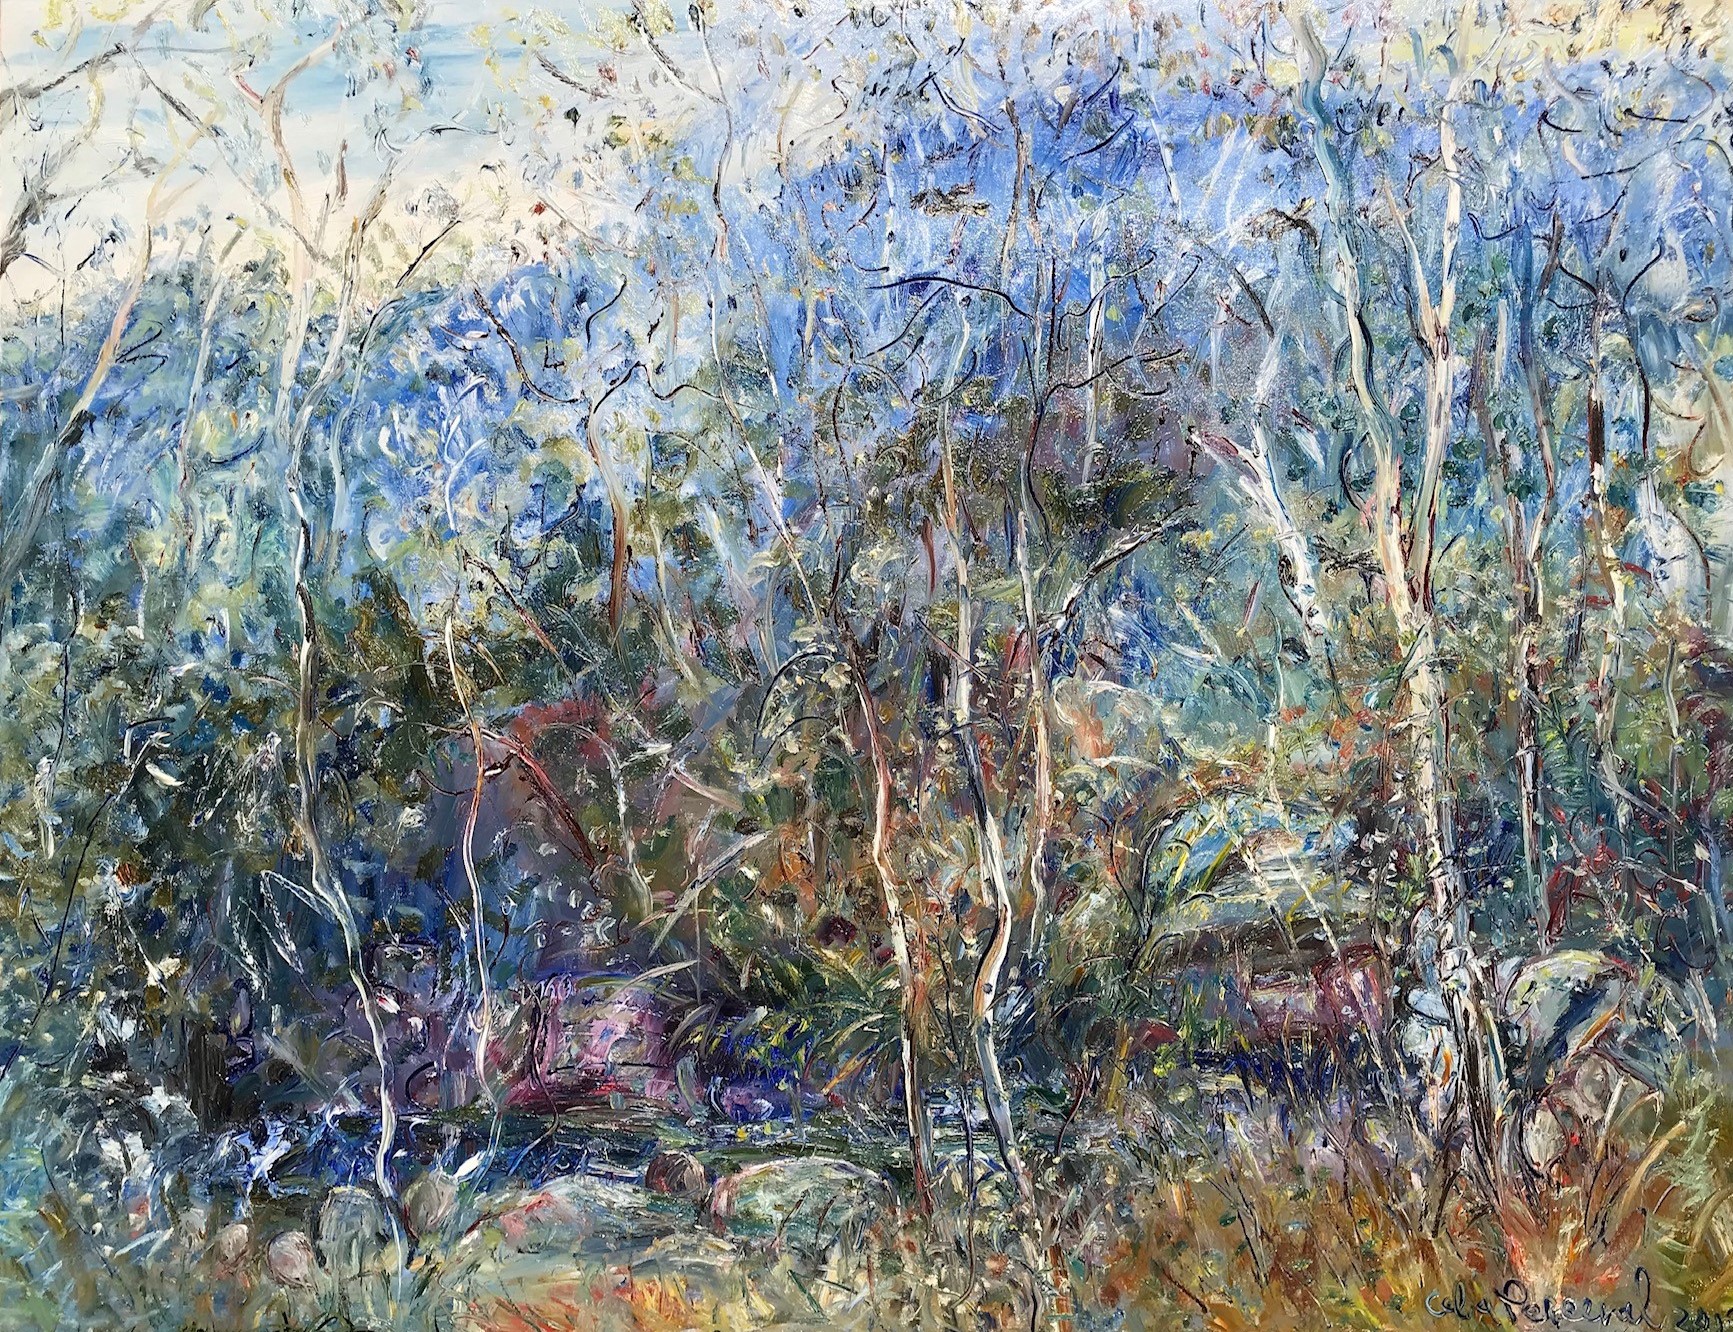 Celia Perceval 'Black Cockatoos Deep in the Gully with Rock Pools on Bells Beach' oil on canvas 153 x 198cm $44,500